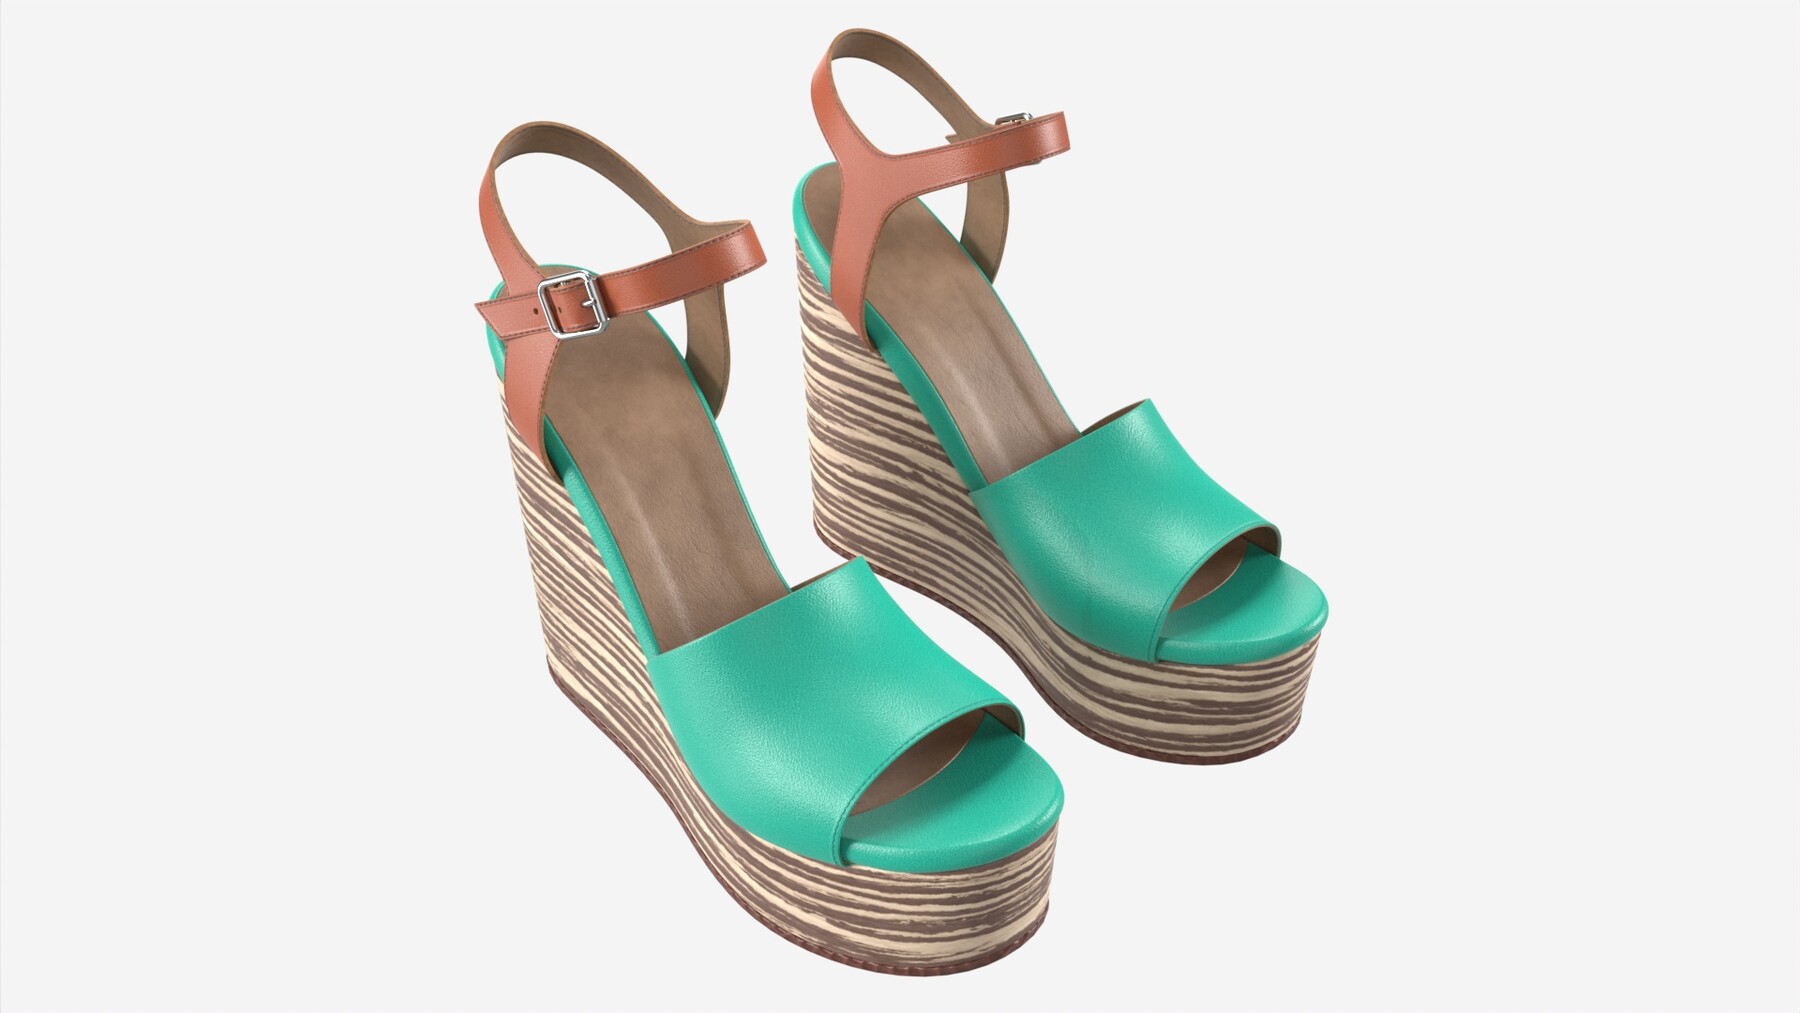 ArtStation - Turquoise women shoes | Resources